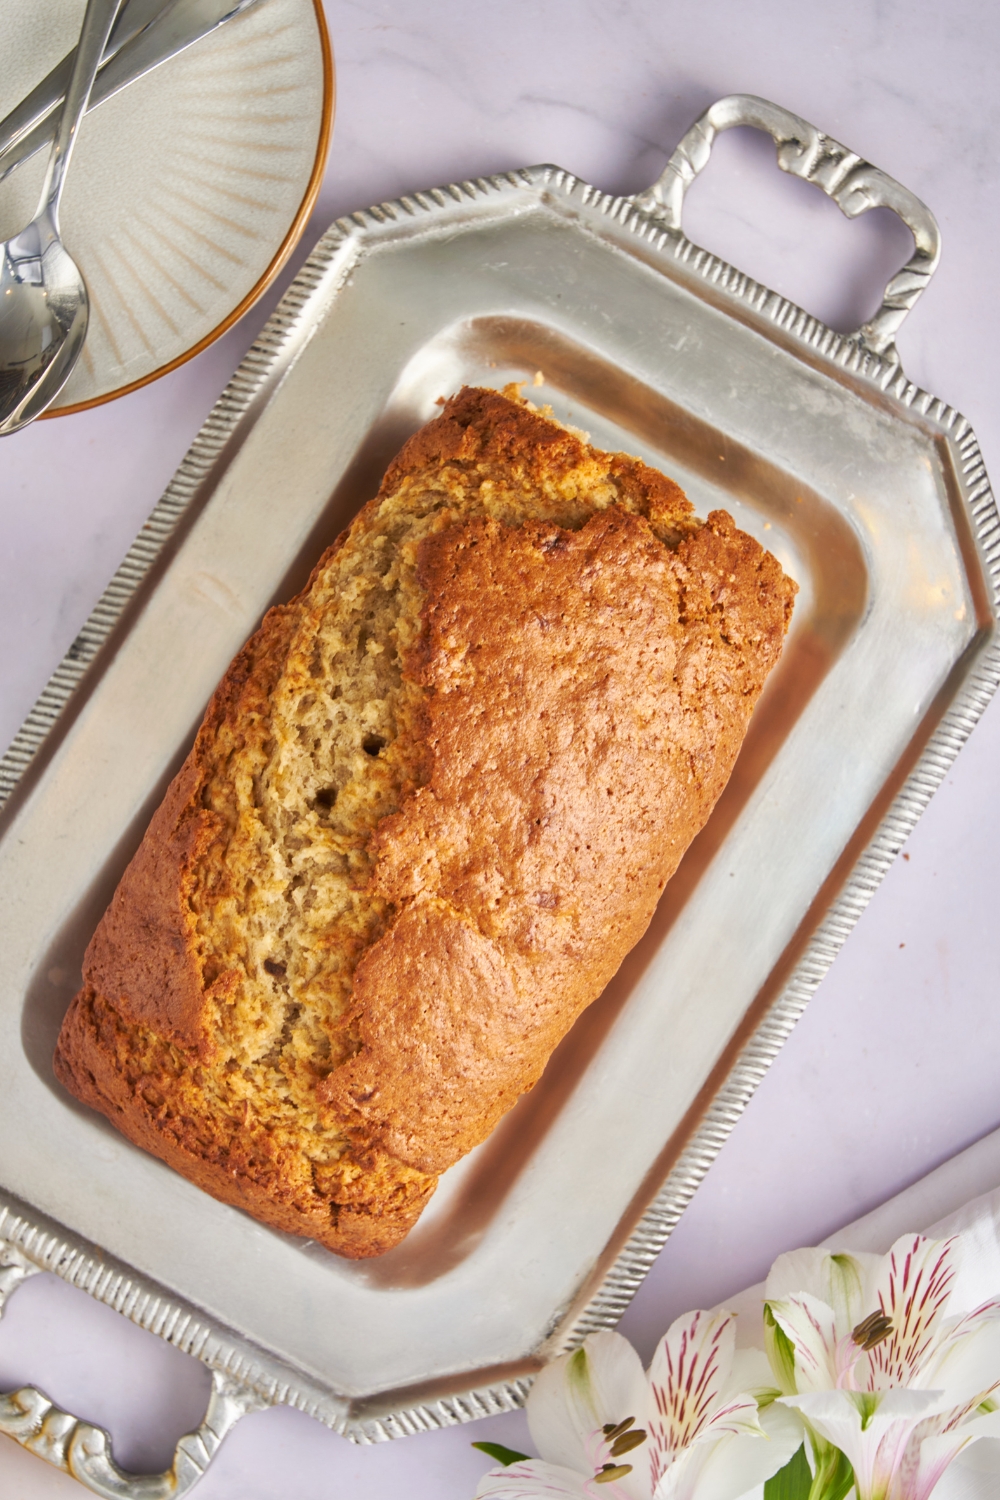 A serving tray with a loaf of banana bread on it.